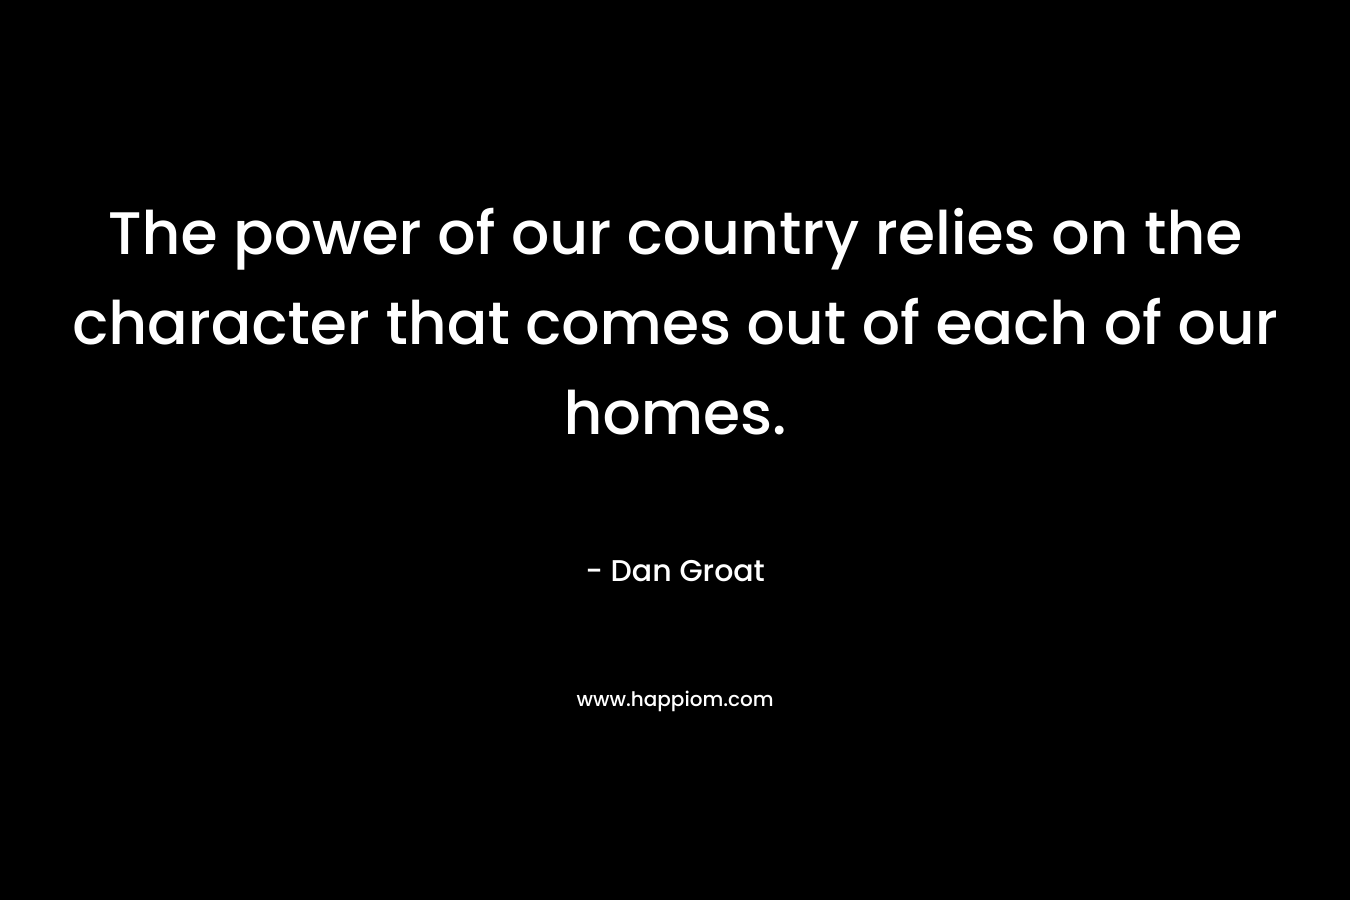 The power of our country relies on the character that comes out of each of our homes. – Dan Groat